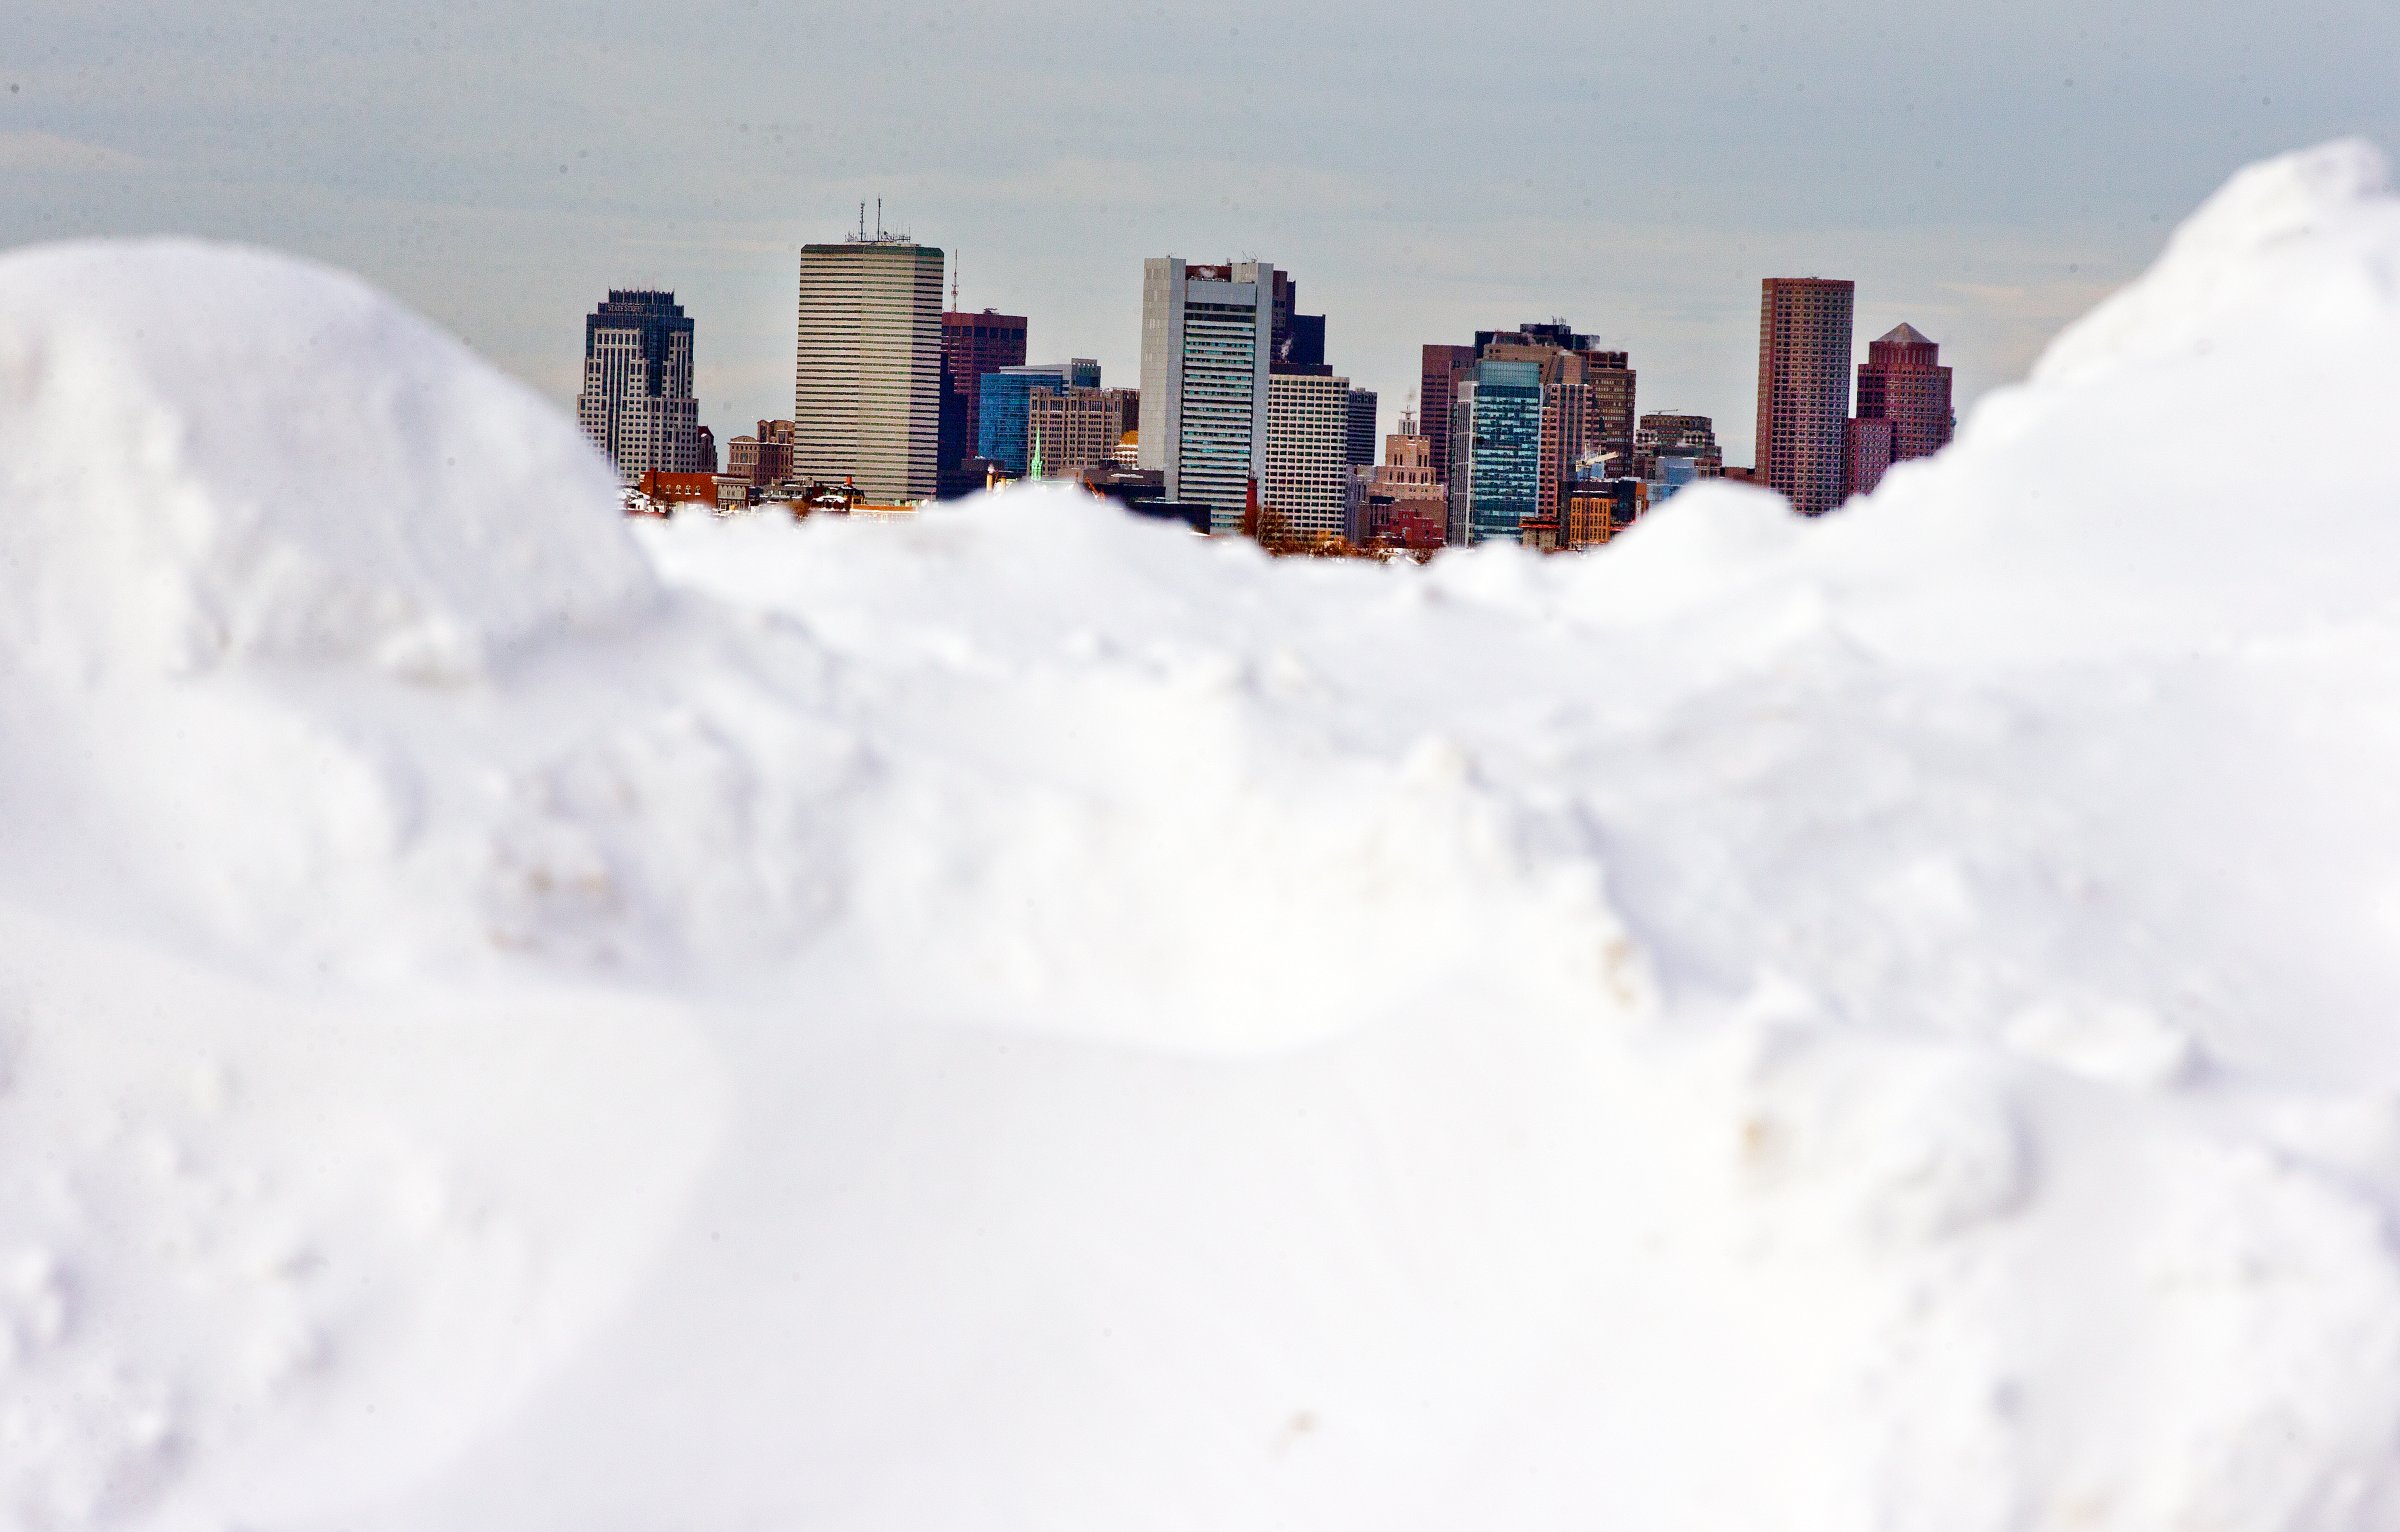 Piles of snow along the streets of Boston.